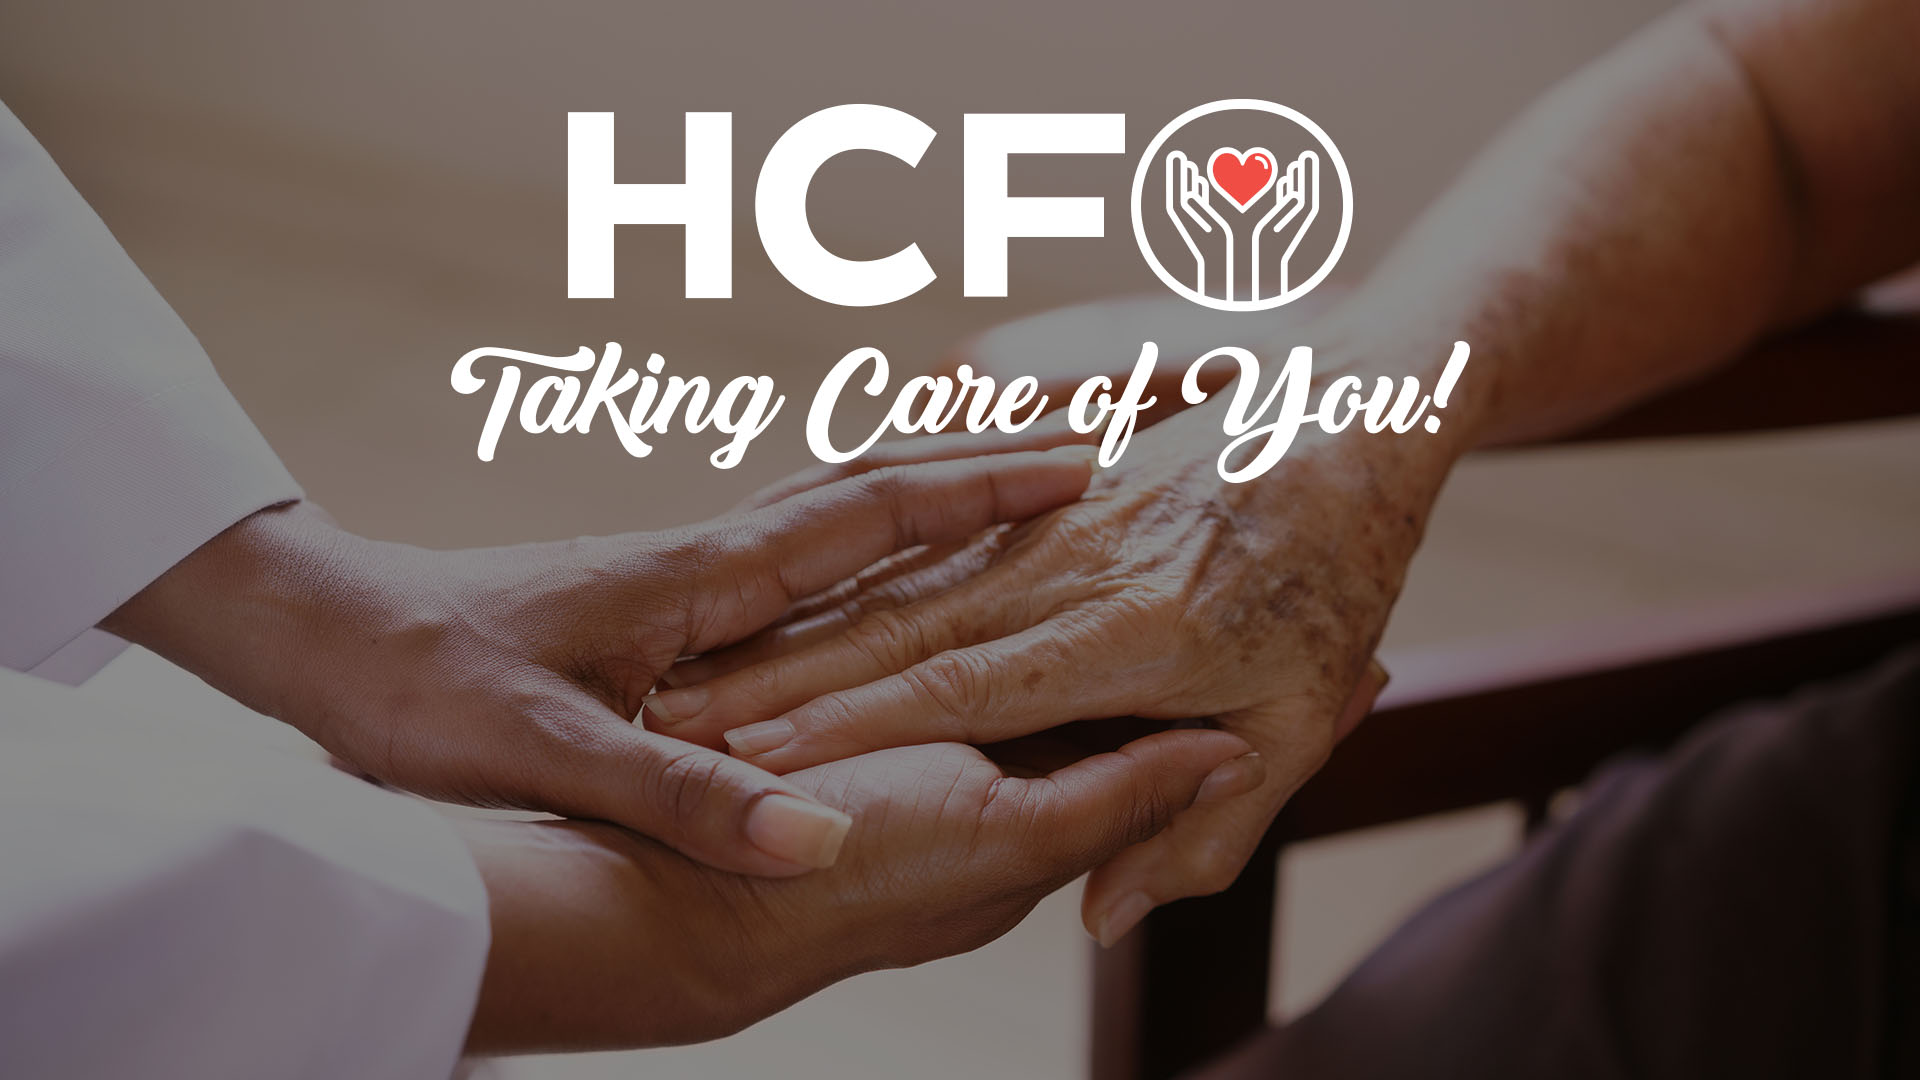 HCFO: Taking Care Of You